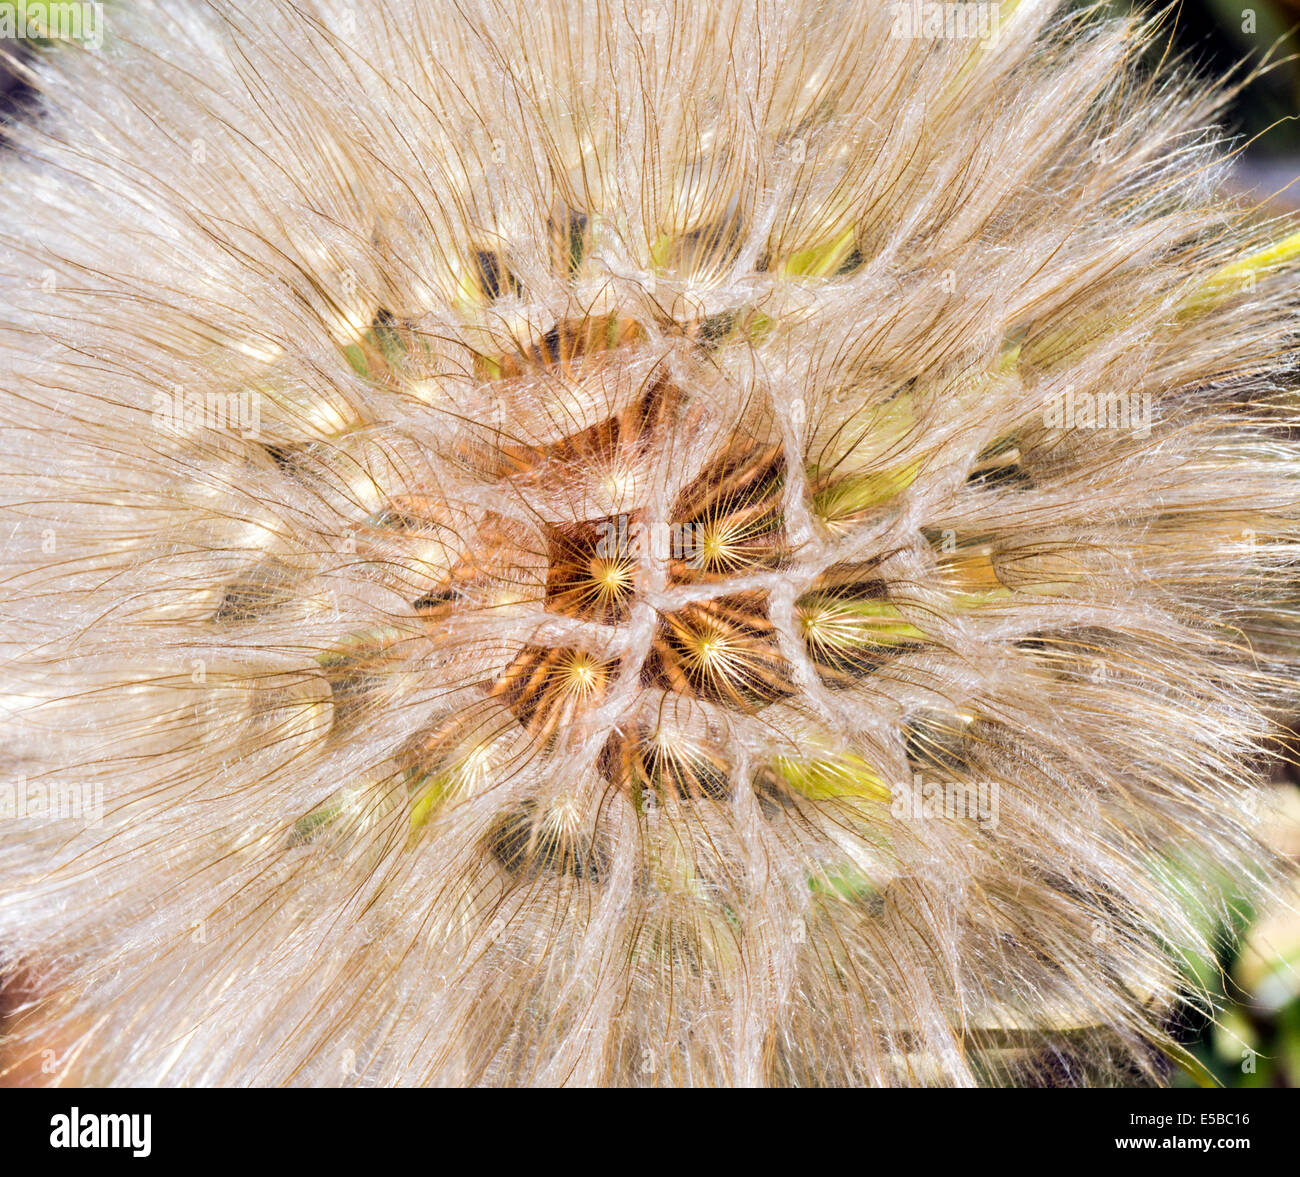 Tragopogon dubius; Salsify; Asteraceae; Sunflower Family; wildflowers in bloom, Central Colorado, USA Stock Photo